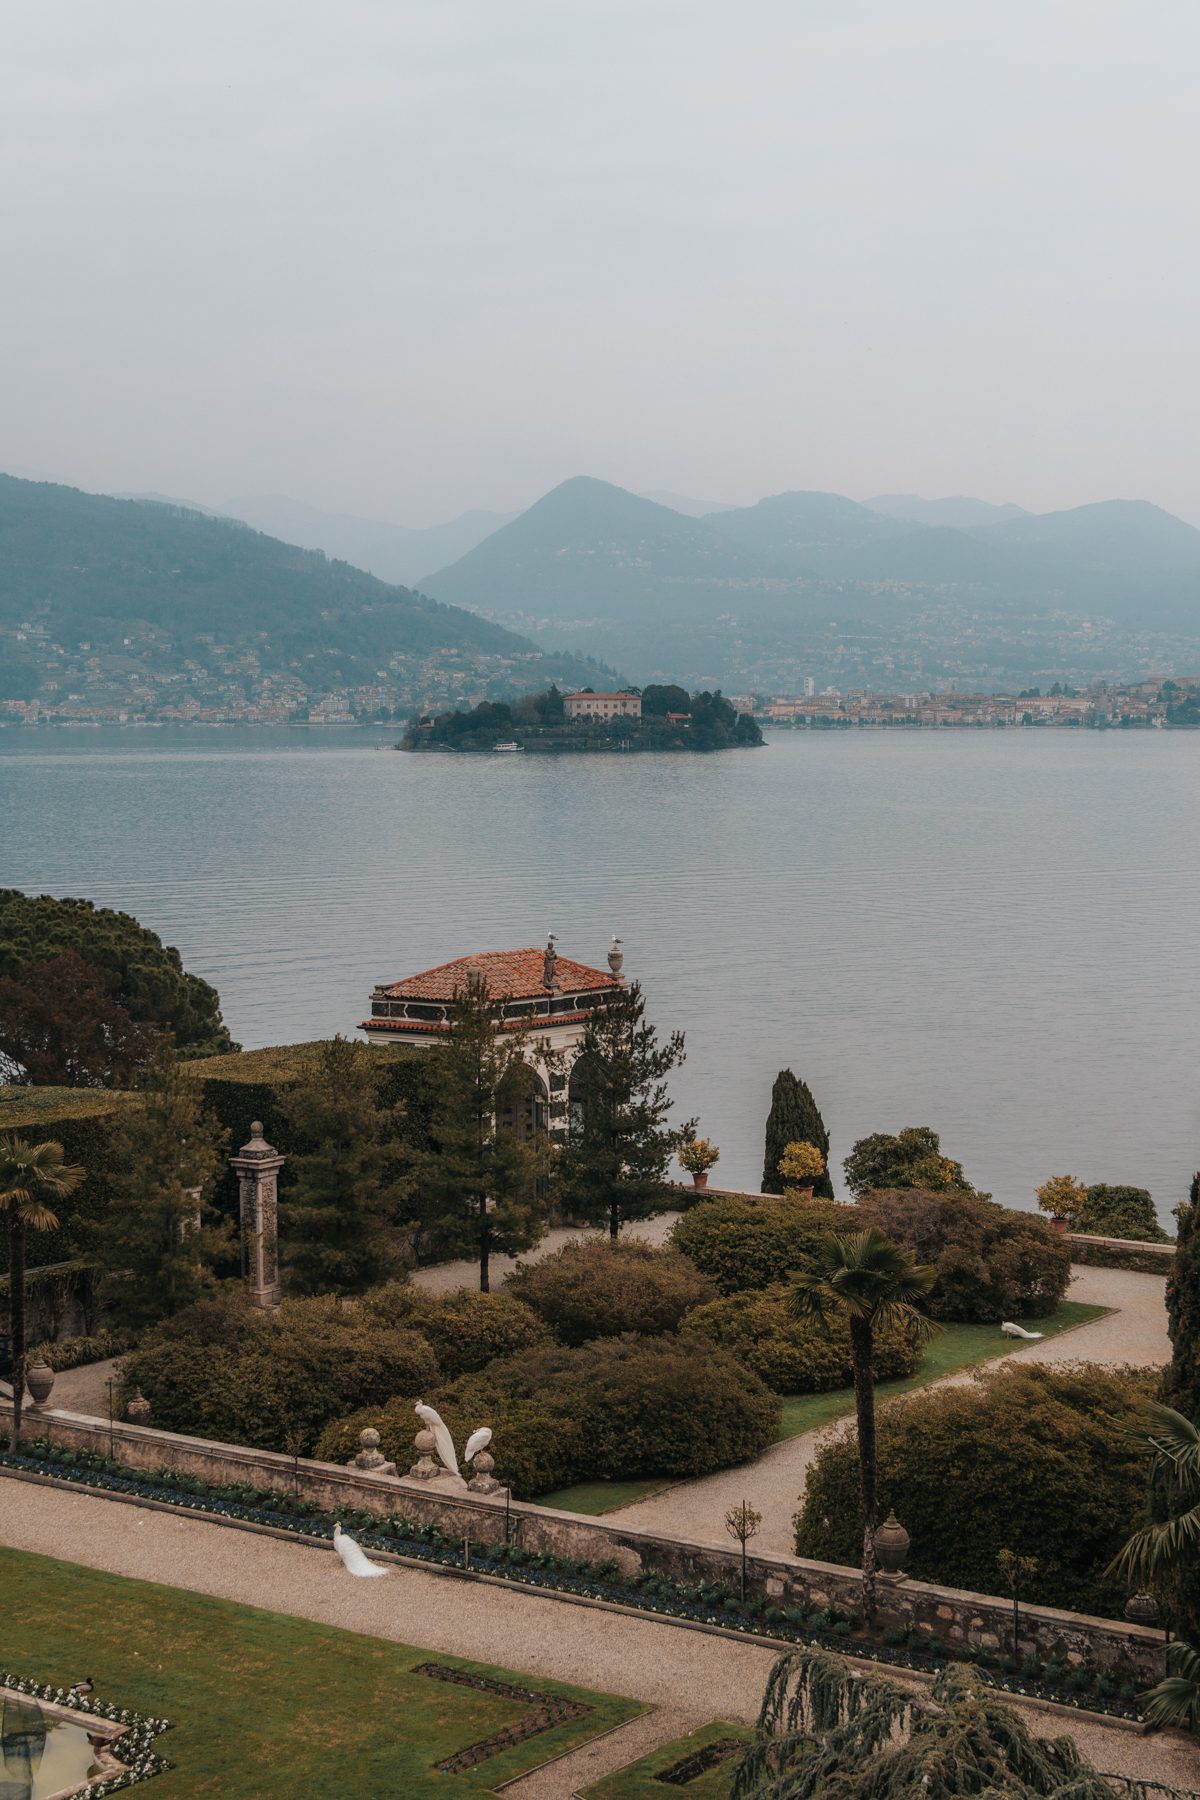 How to Enjoy the Beautiful Borromean Islands on Italy’s Lake Maggiore